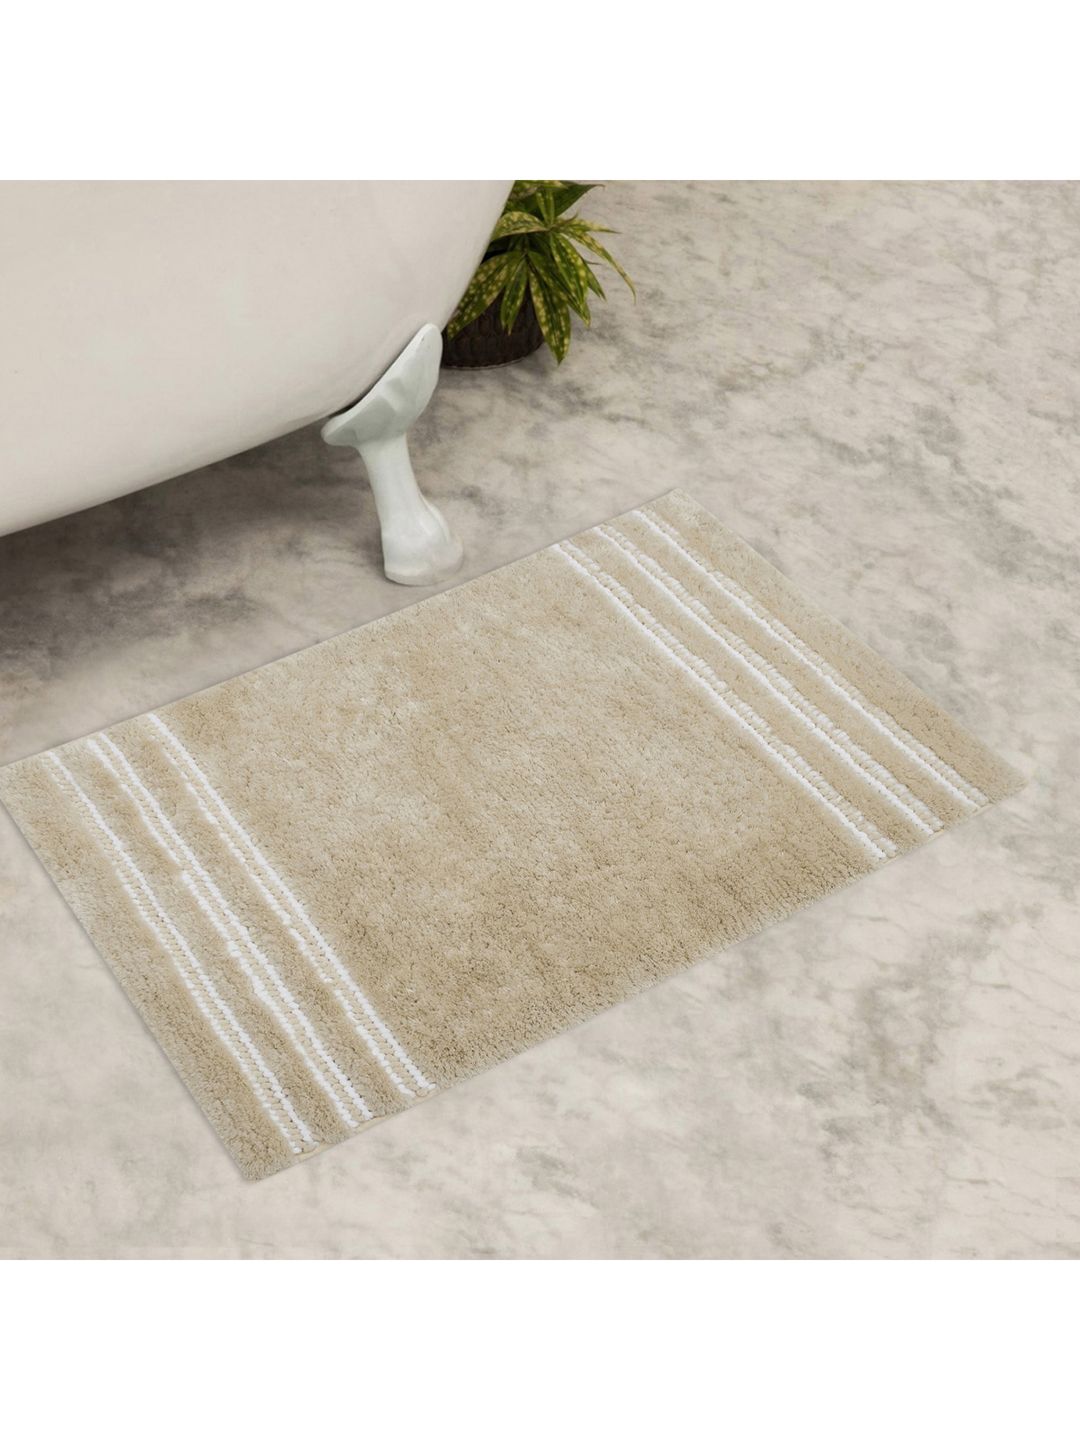 Home Centre Beige Striped Woven Bathmat Price in India